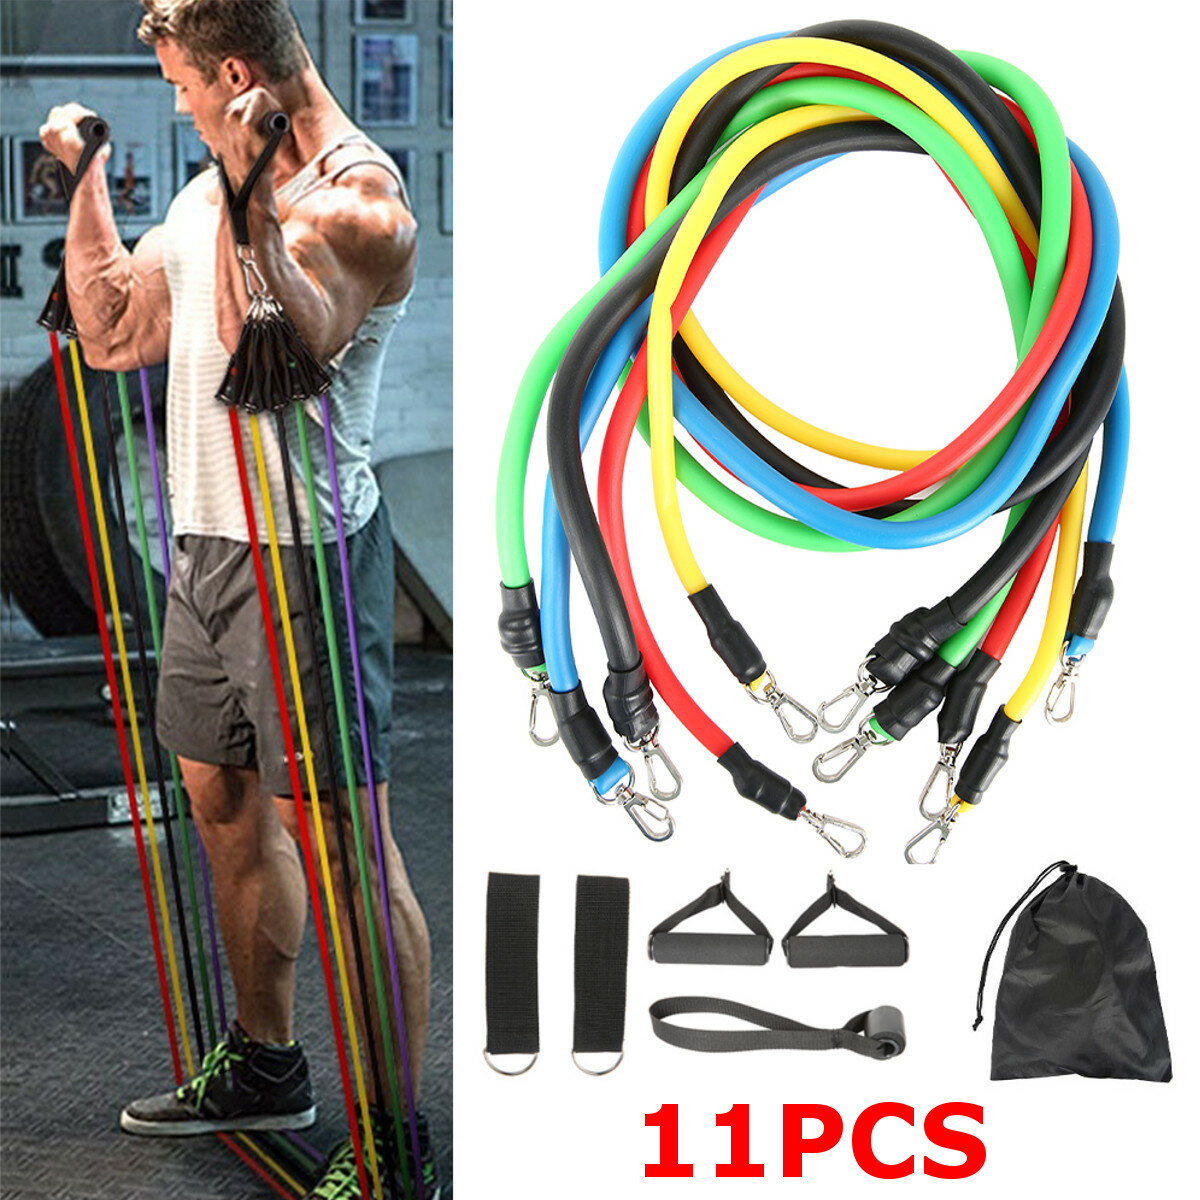 11PCS Resistance Bands Set Pull Rope Home Gym Equipment Yoga Fitness Exercise UK 